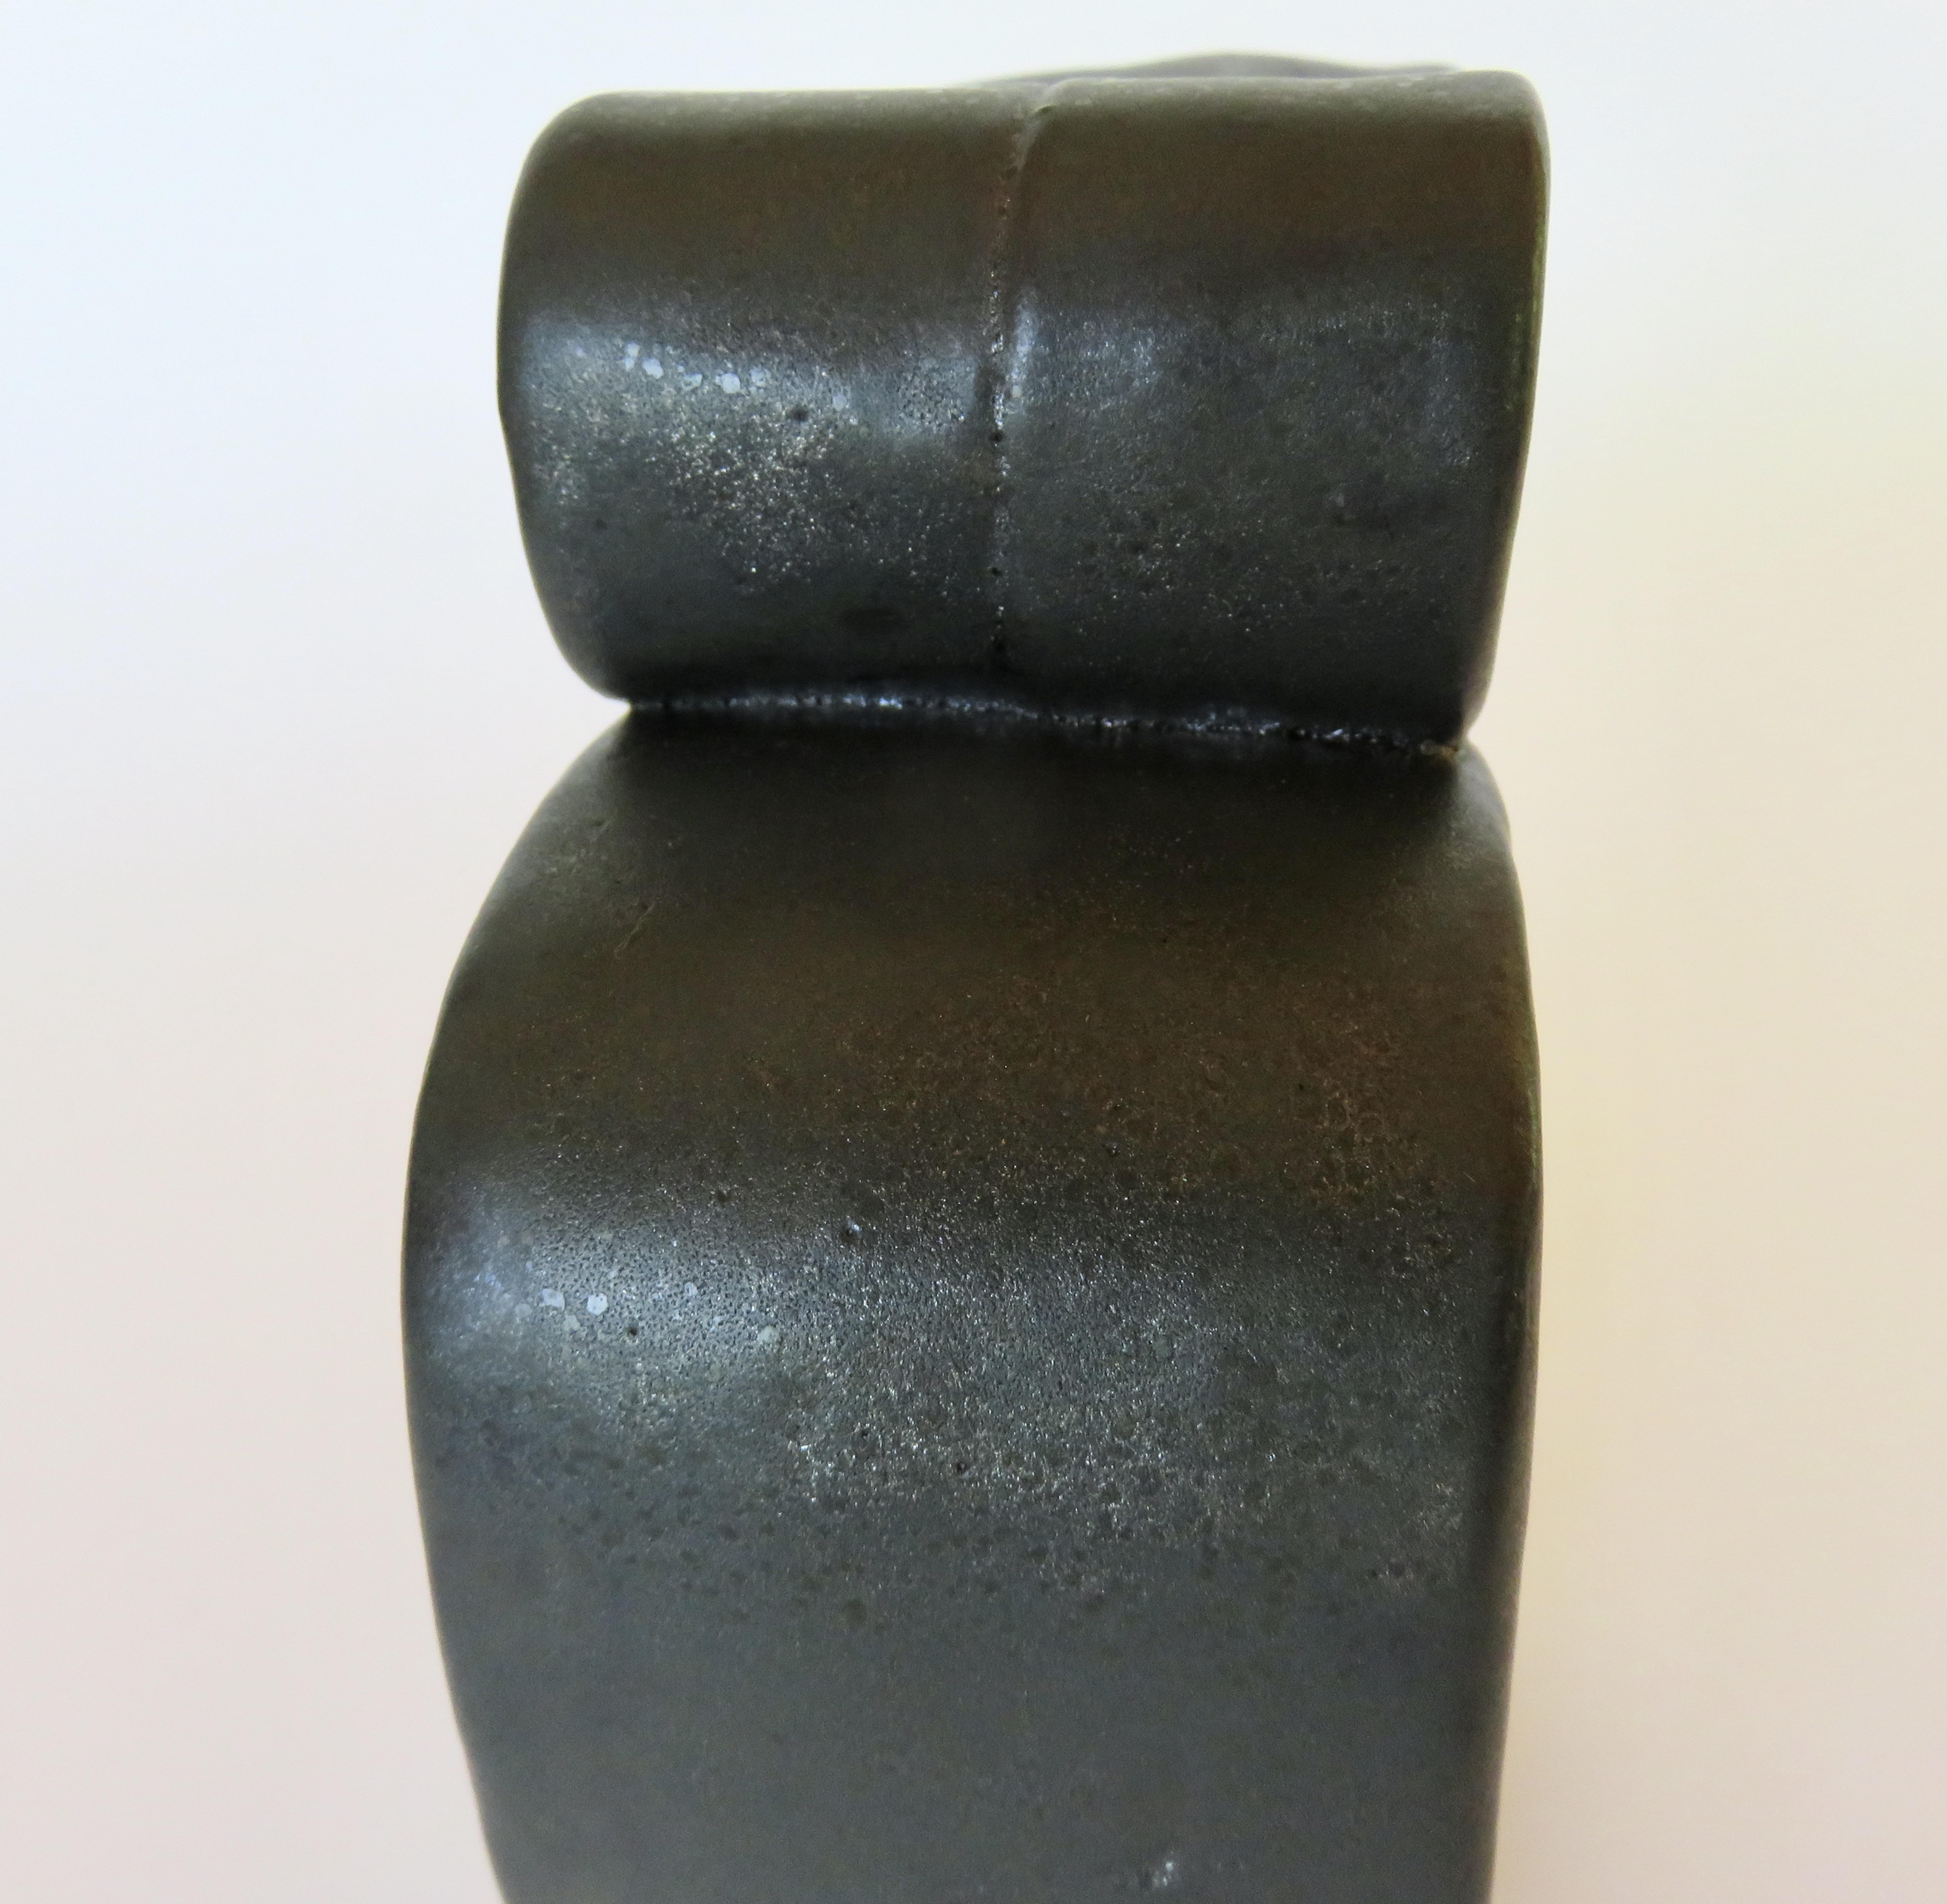 Metallic Black Hand-Built Ceramic Sculpture with Hollow Rings on Angled Legs 5